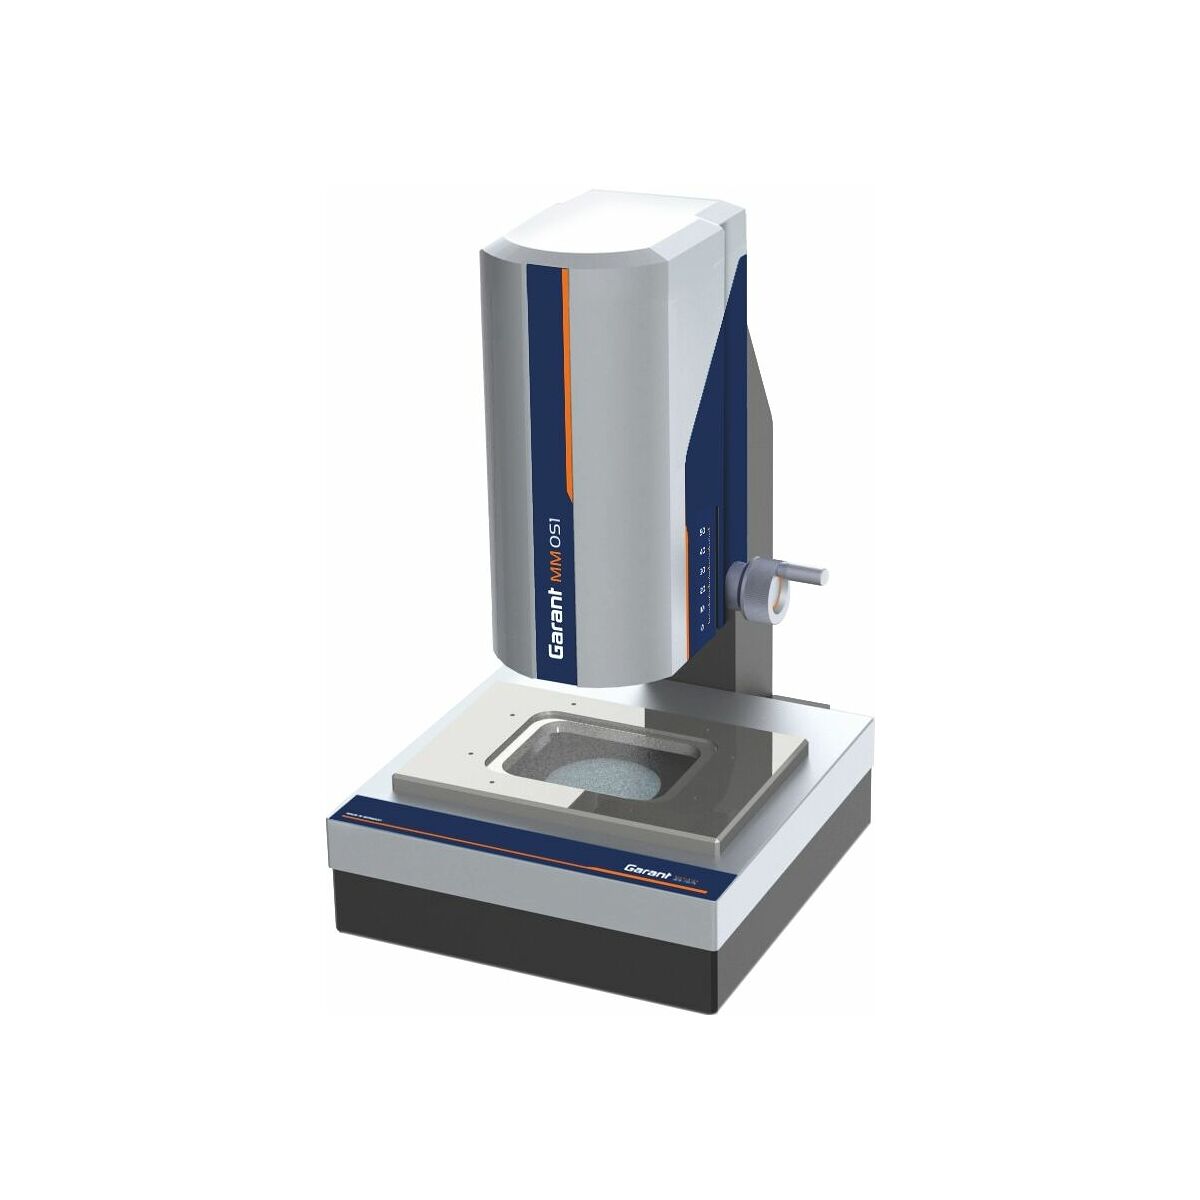 Video measuring microscope MM-OS